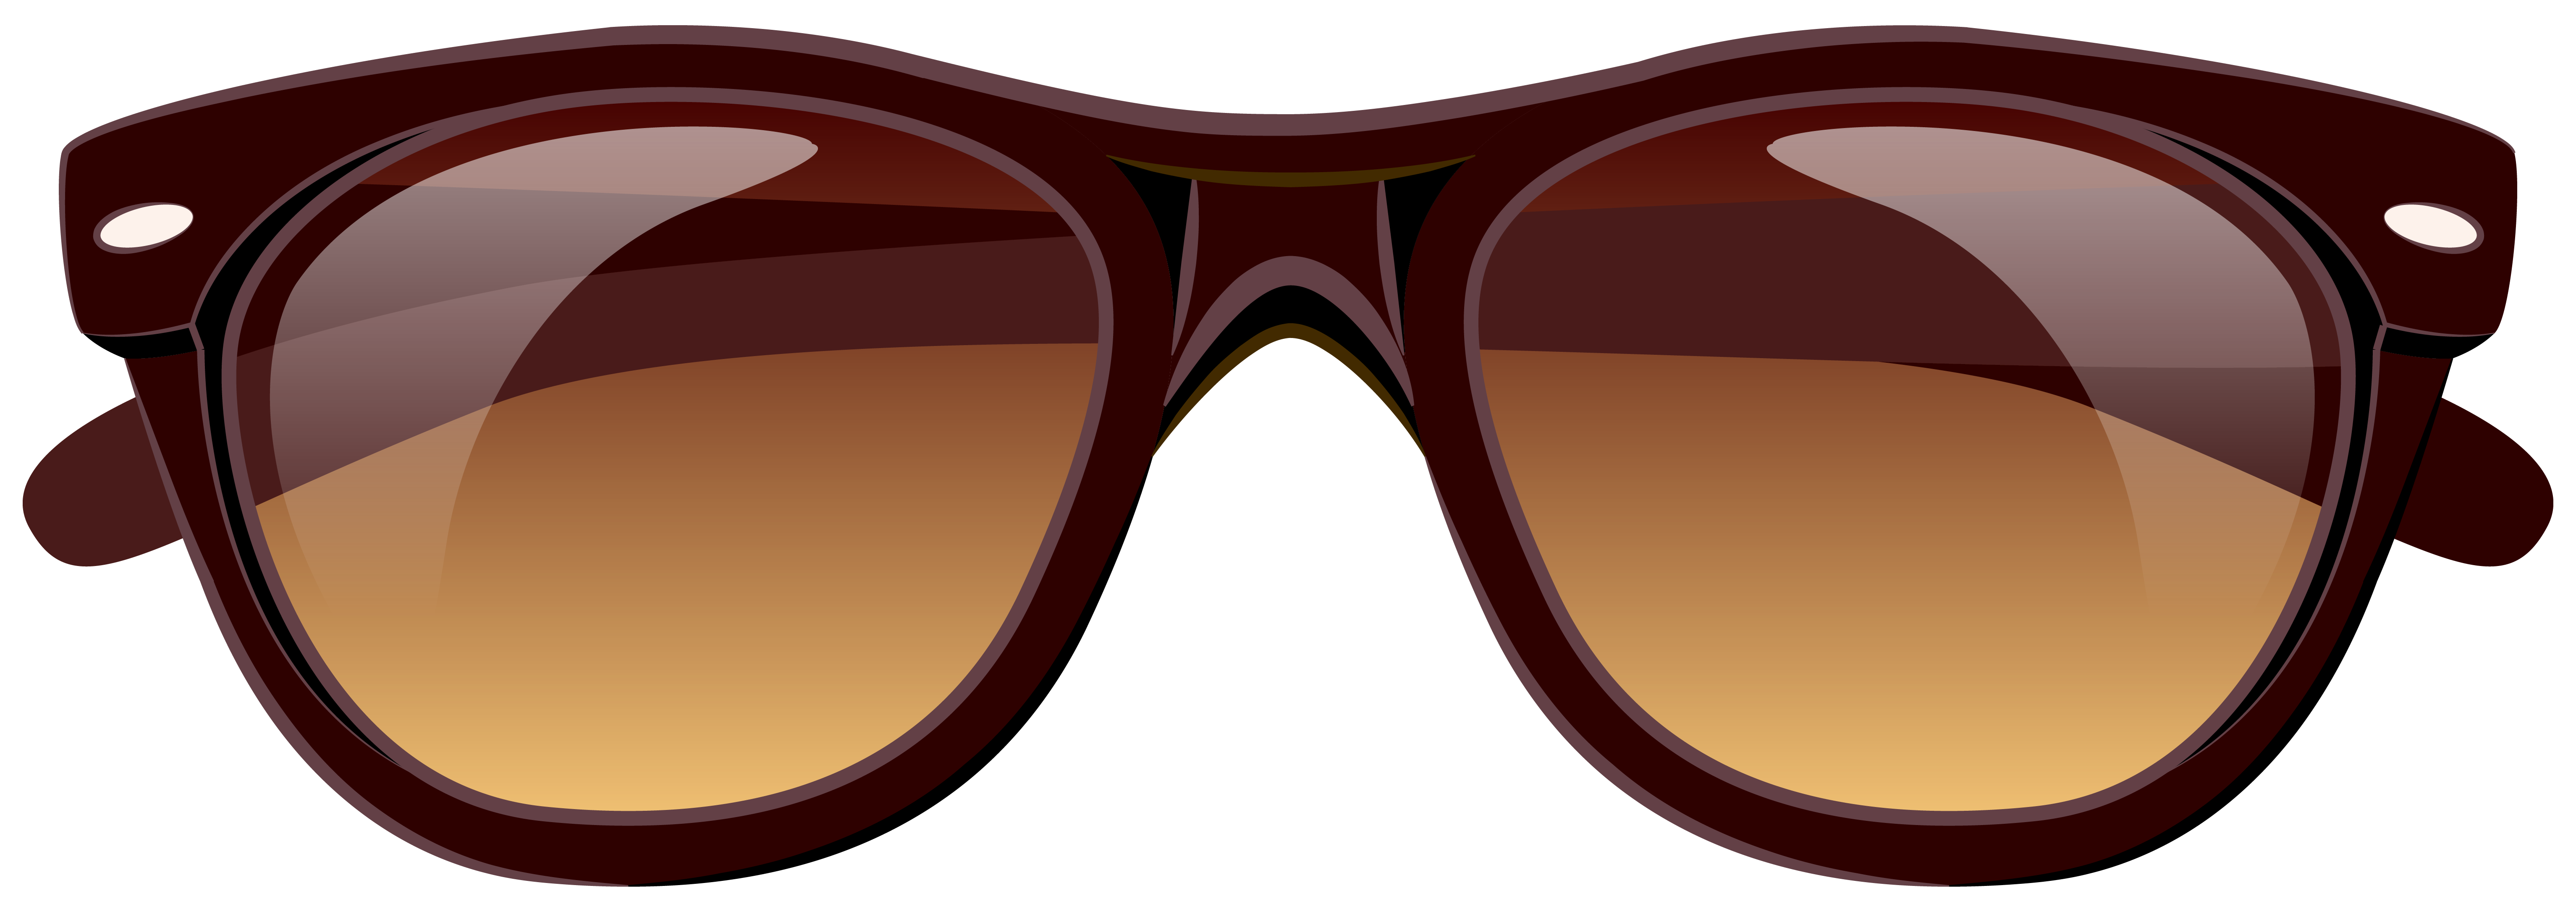 Brown png picture gallery. Female clipart sunglasses